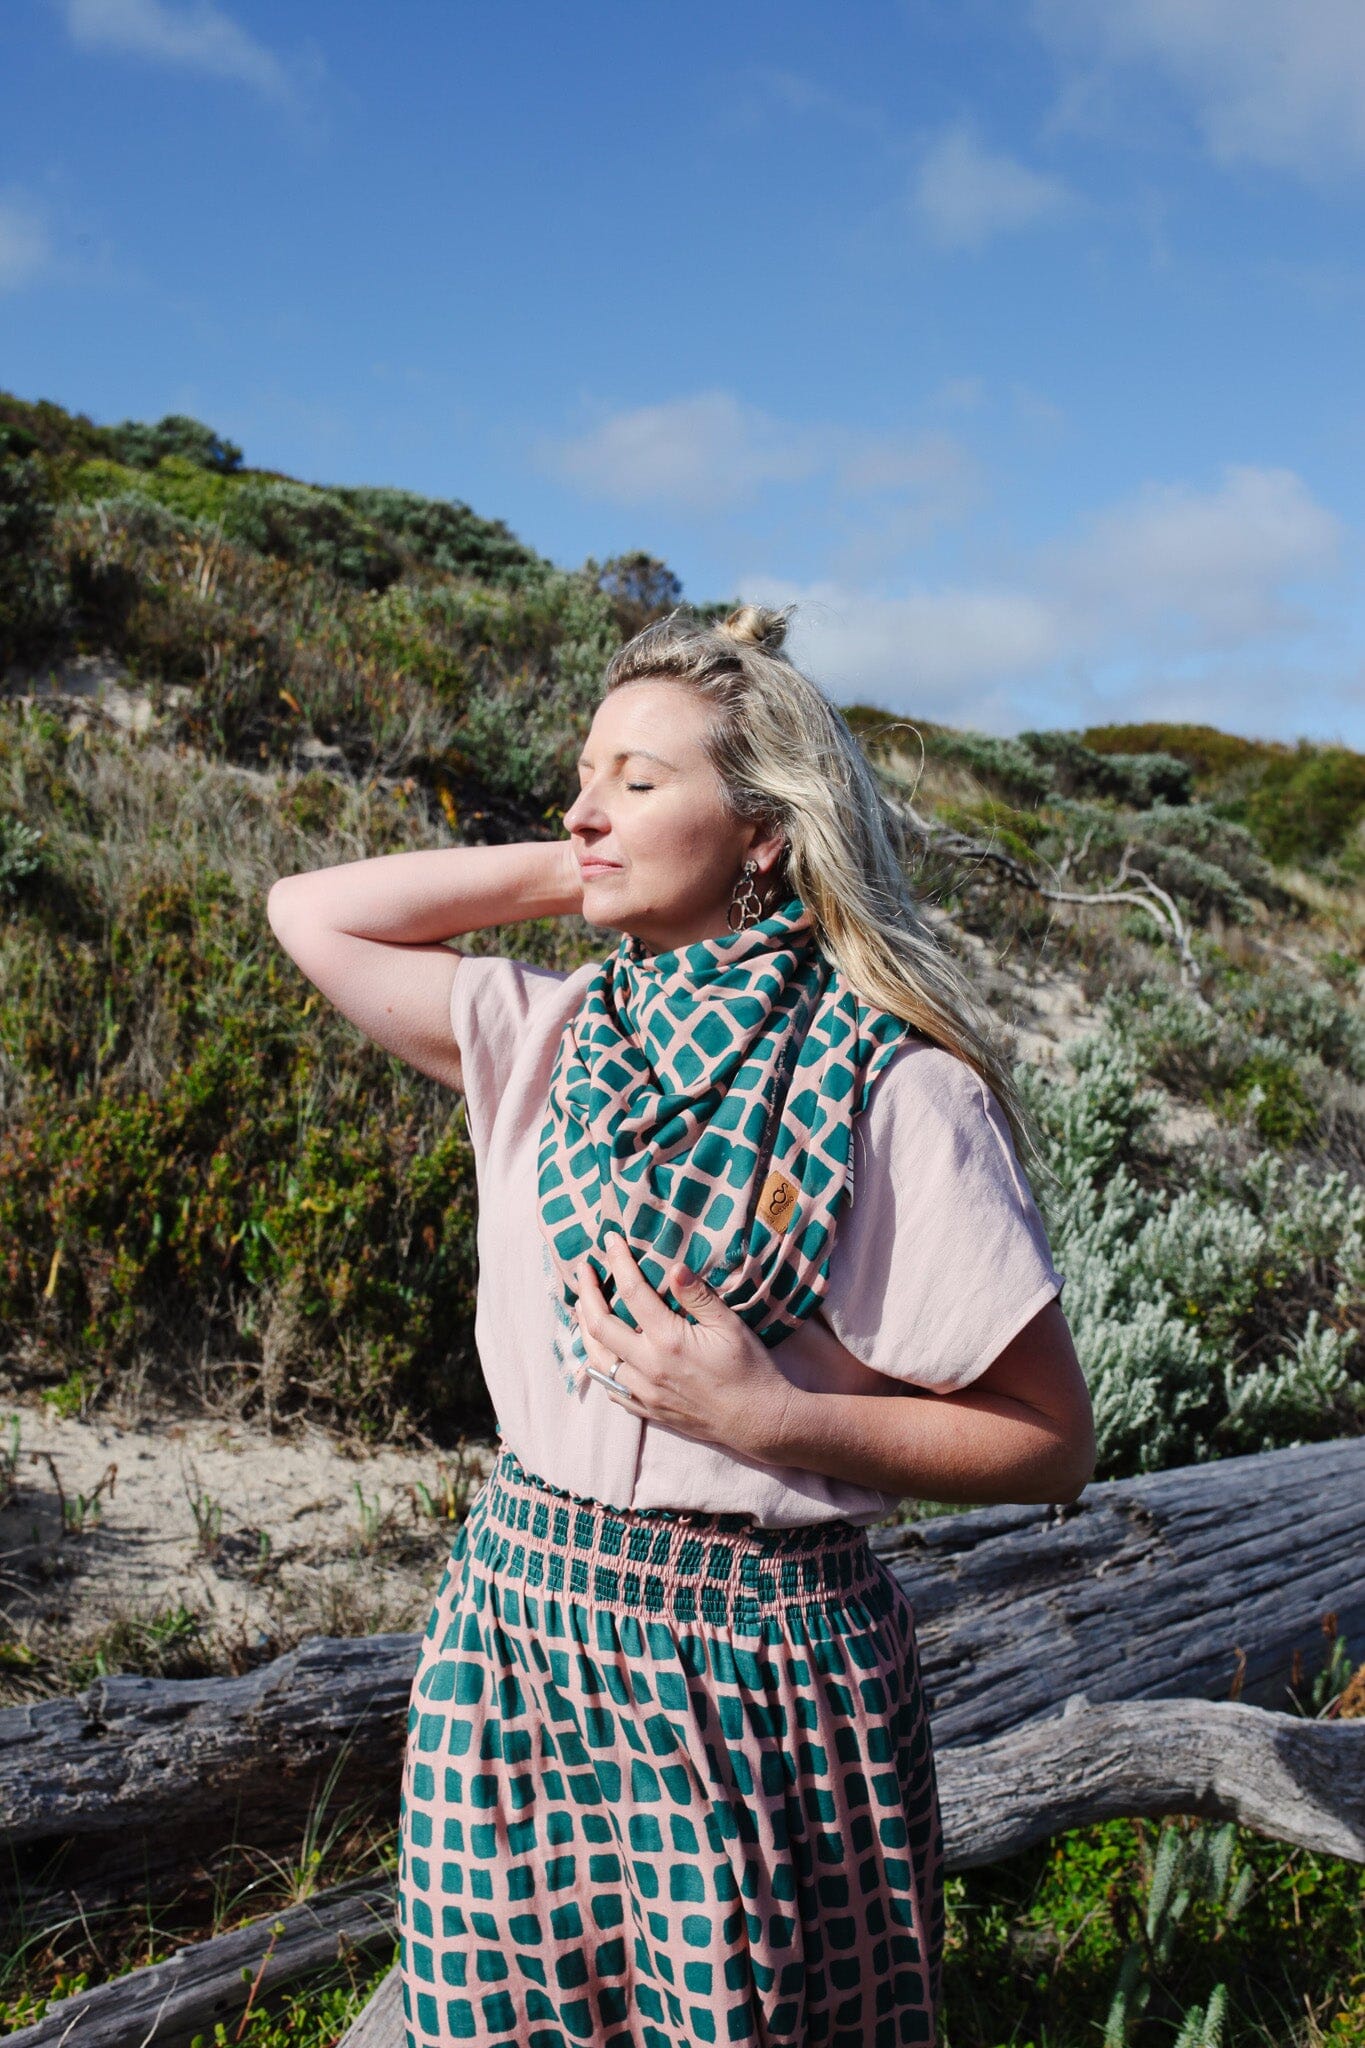 Washed Linen Shell Top - Rose Shirts & Tops The Spotted Quoll 